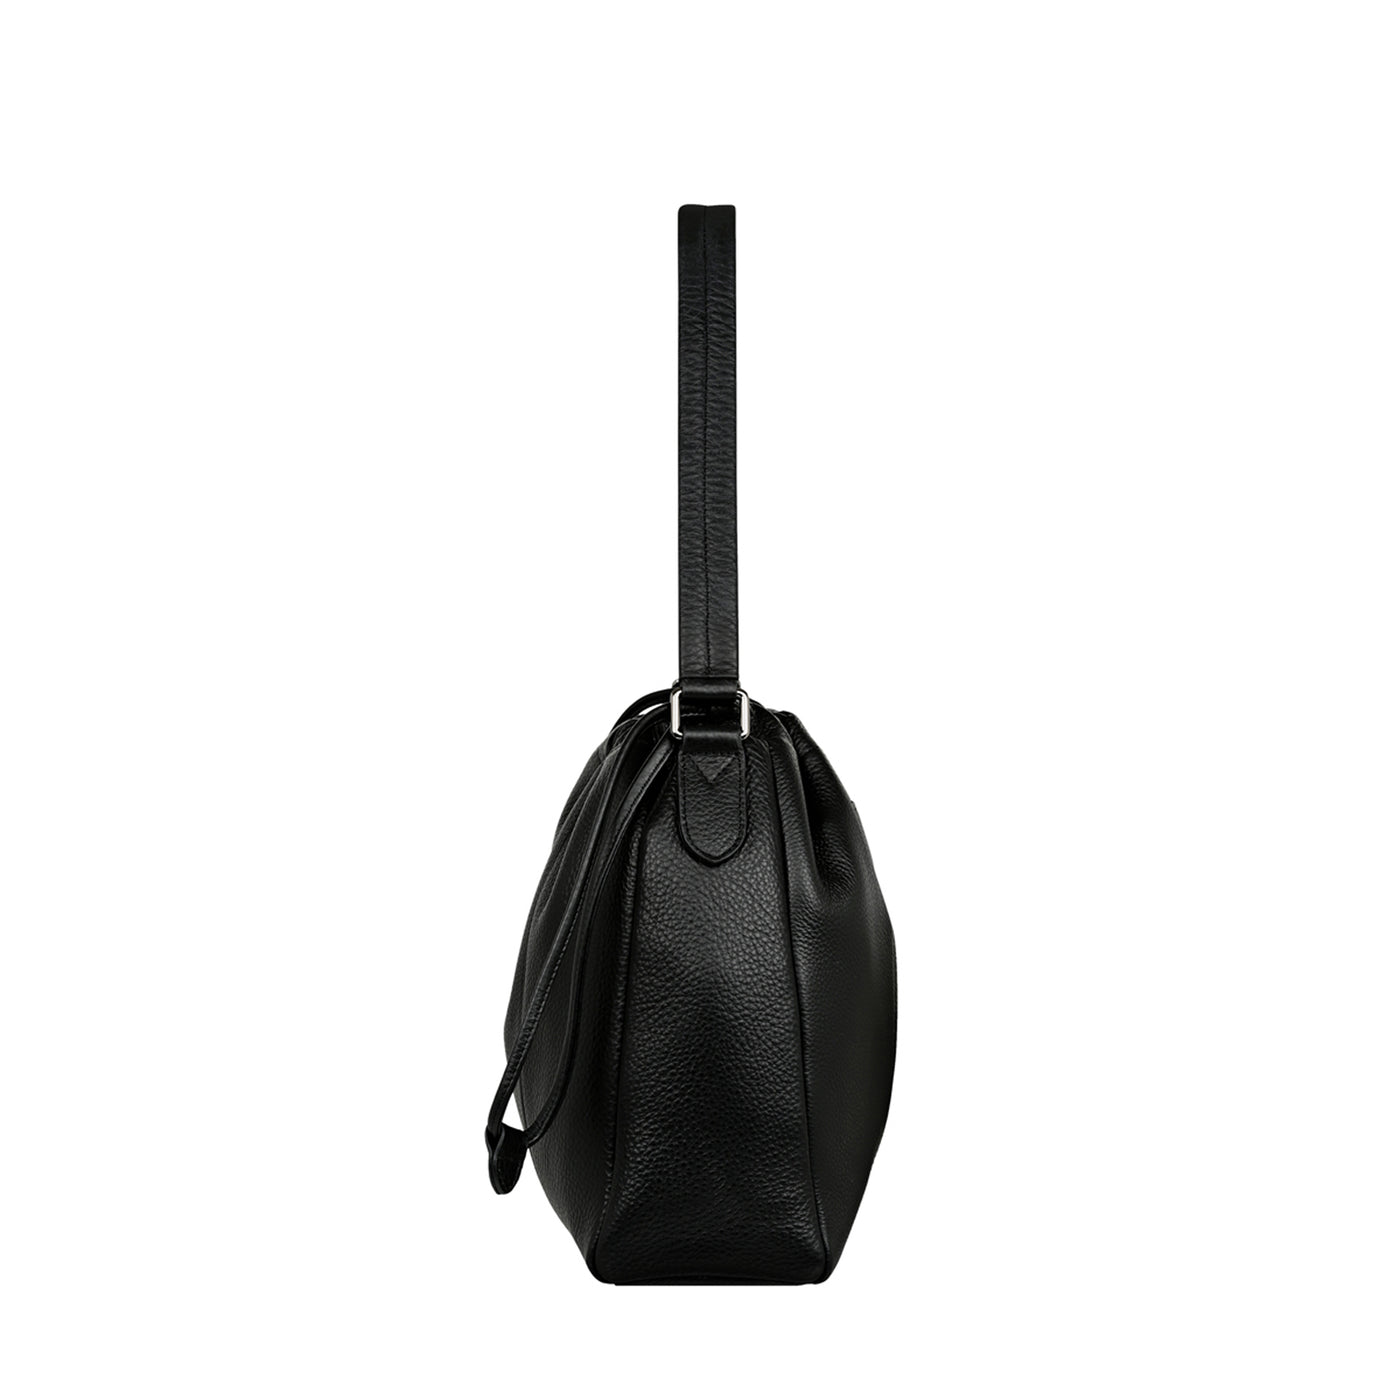 STATUS ANXIETY POINT OF NO RETURN - BLACK  The Status Anxiety Point Of No Return is a stylish bag in a large yet, convenient size great for daily use, now available in: Black.